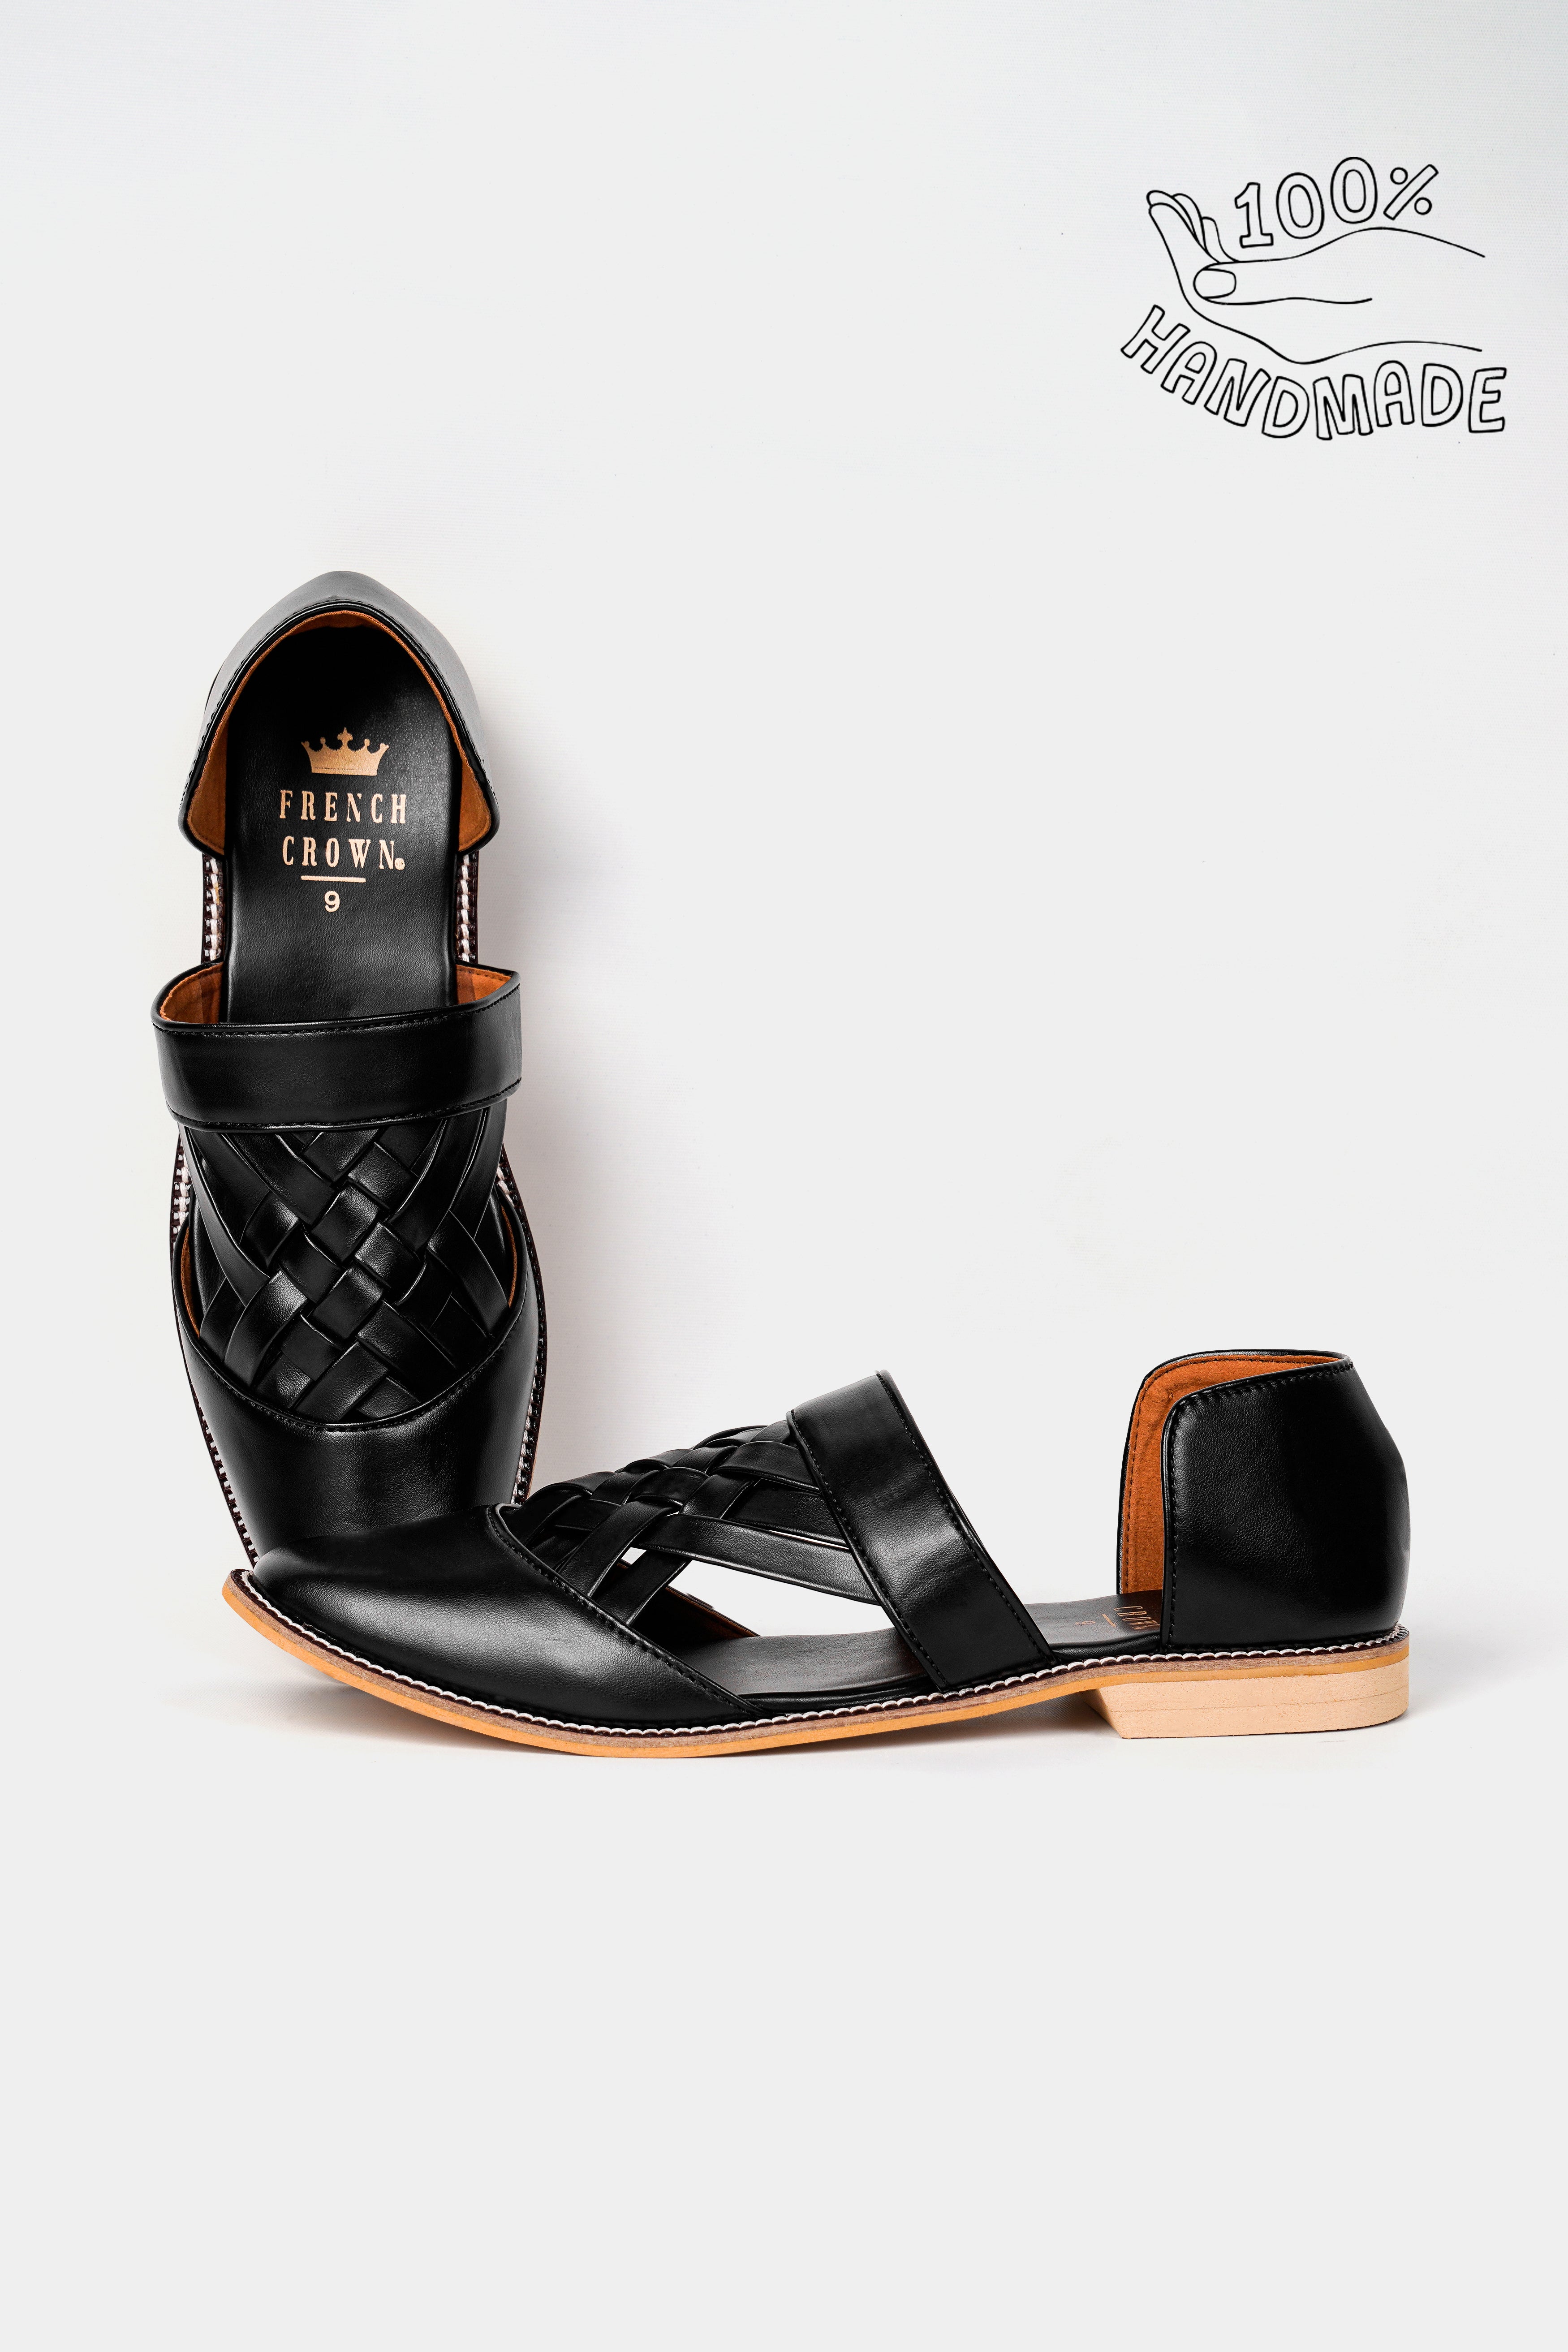 Jade Black Criss Cross Vegan Leather Hand Stitched Pathanis Sandal FT124-6, FT124-7, FT124-8, FT124-9, FT124-10, FT124-11